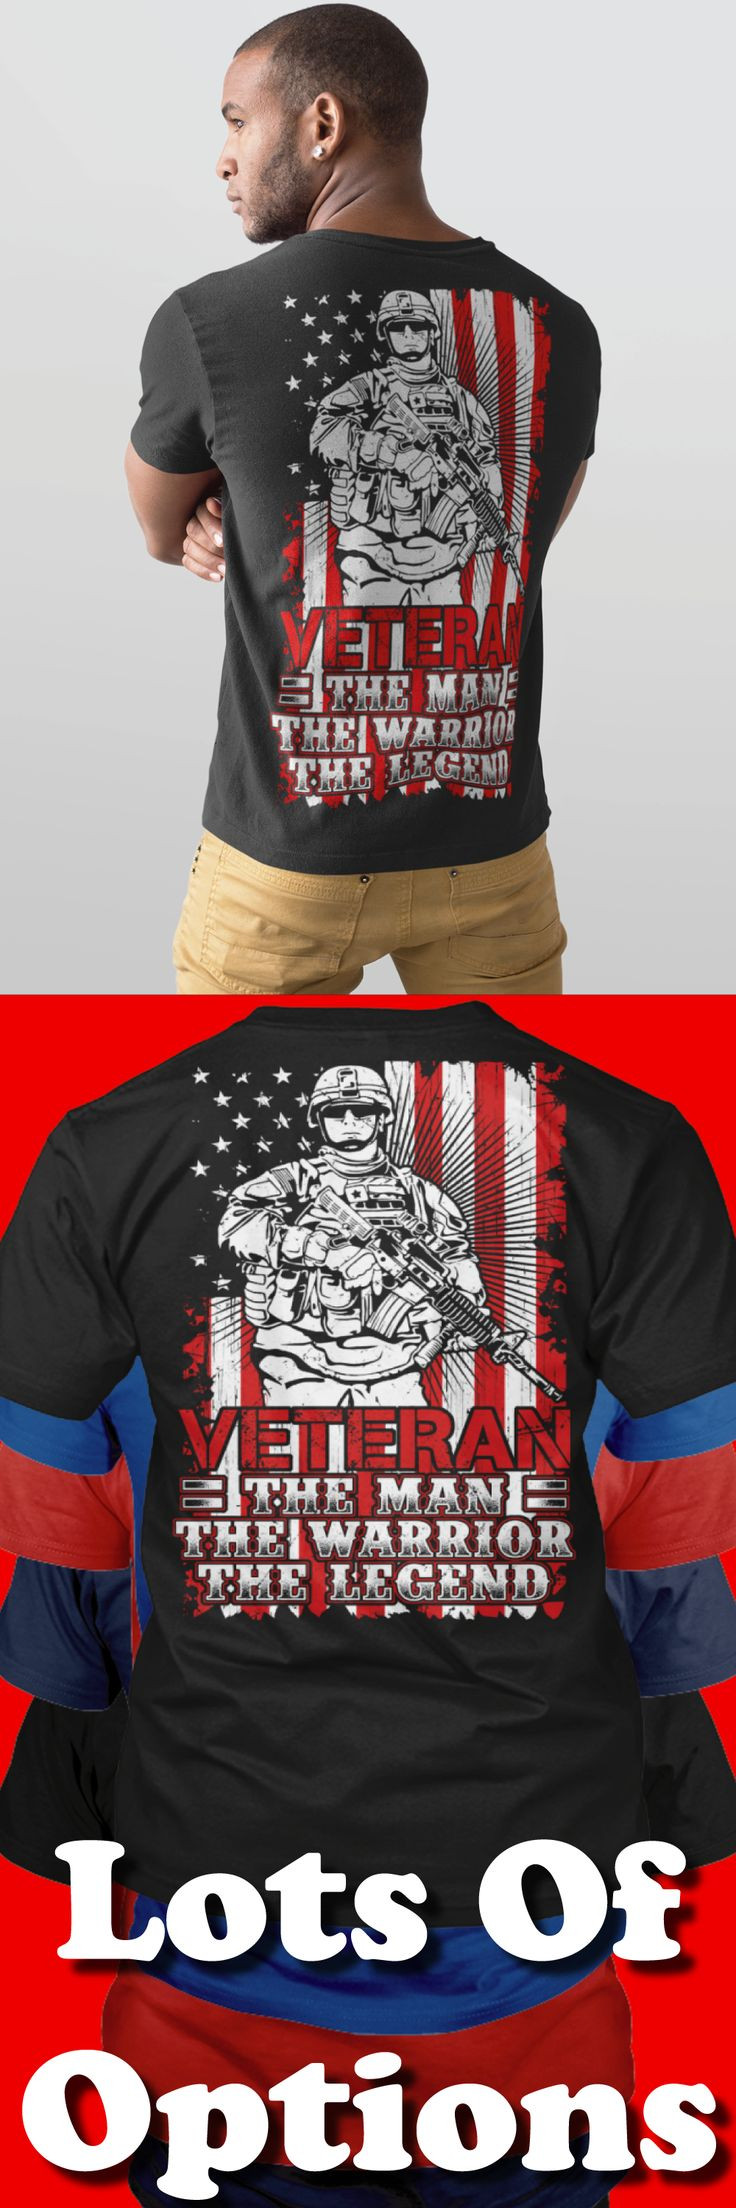 Veterans Day Gift Ideas Boyfriend
 1000 ideas about Army Gifts on Pinterest